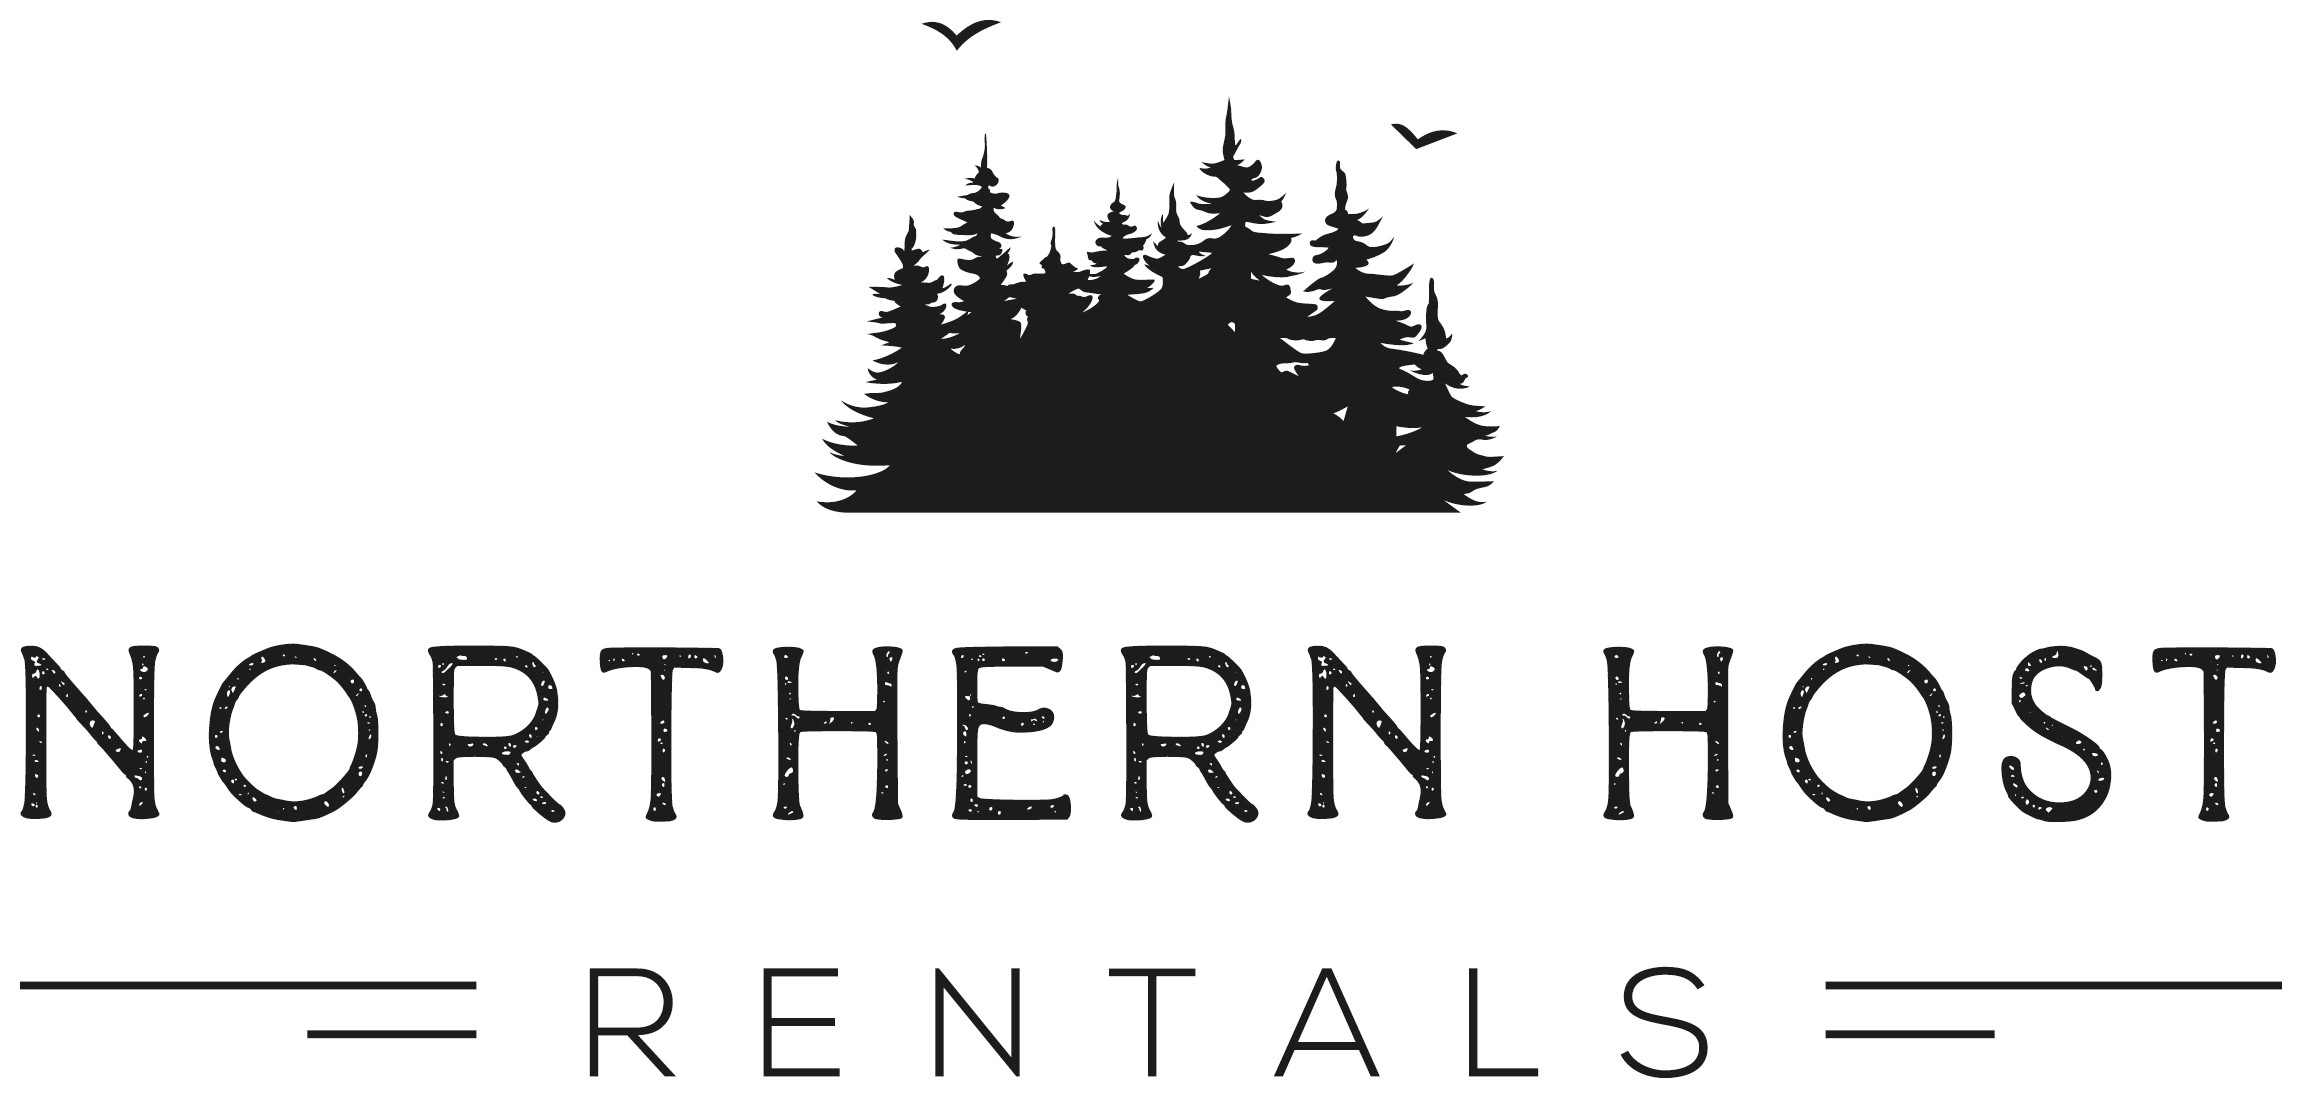 Northern Host Rentals - Full-Service Vacation Rental Management Company serving Osoyoos, Whistler, and Vancouver in British Columbia, Canada.